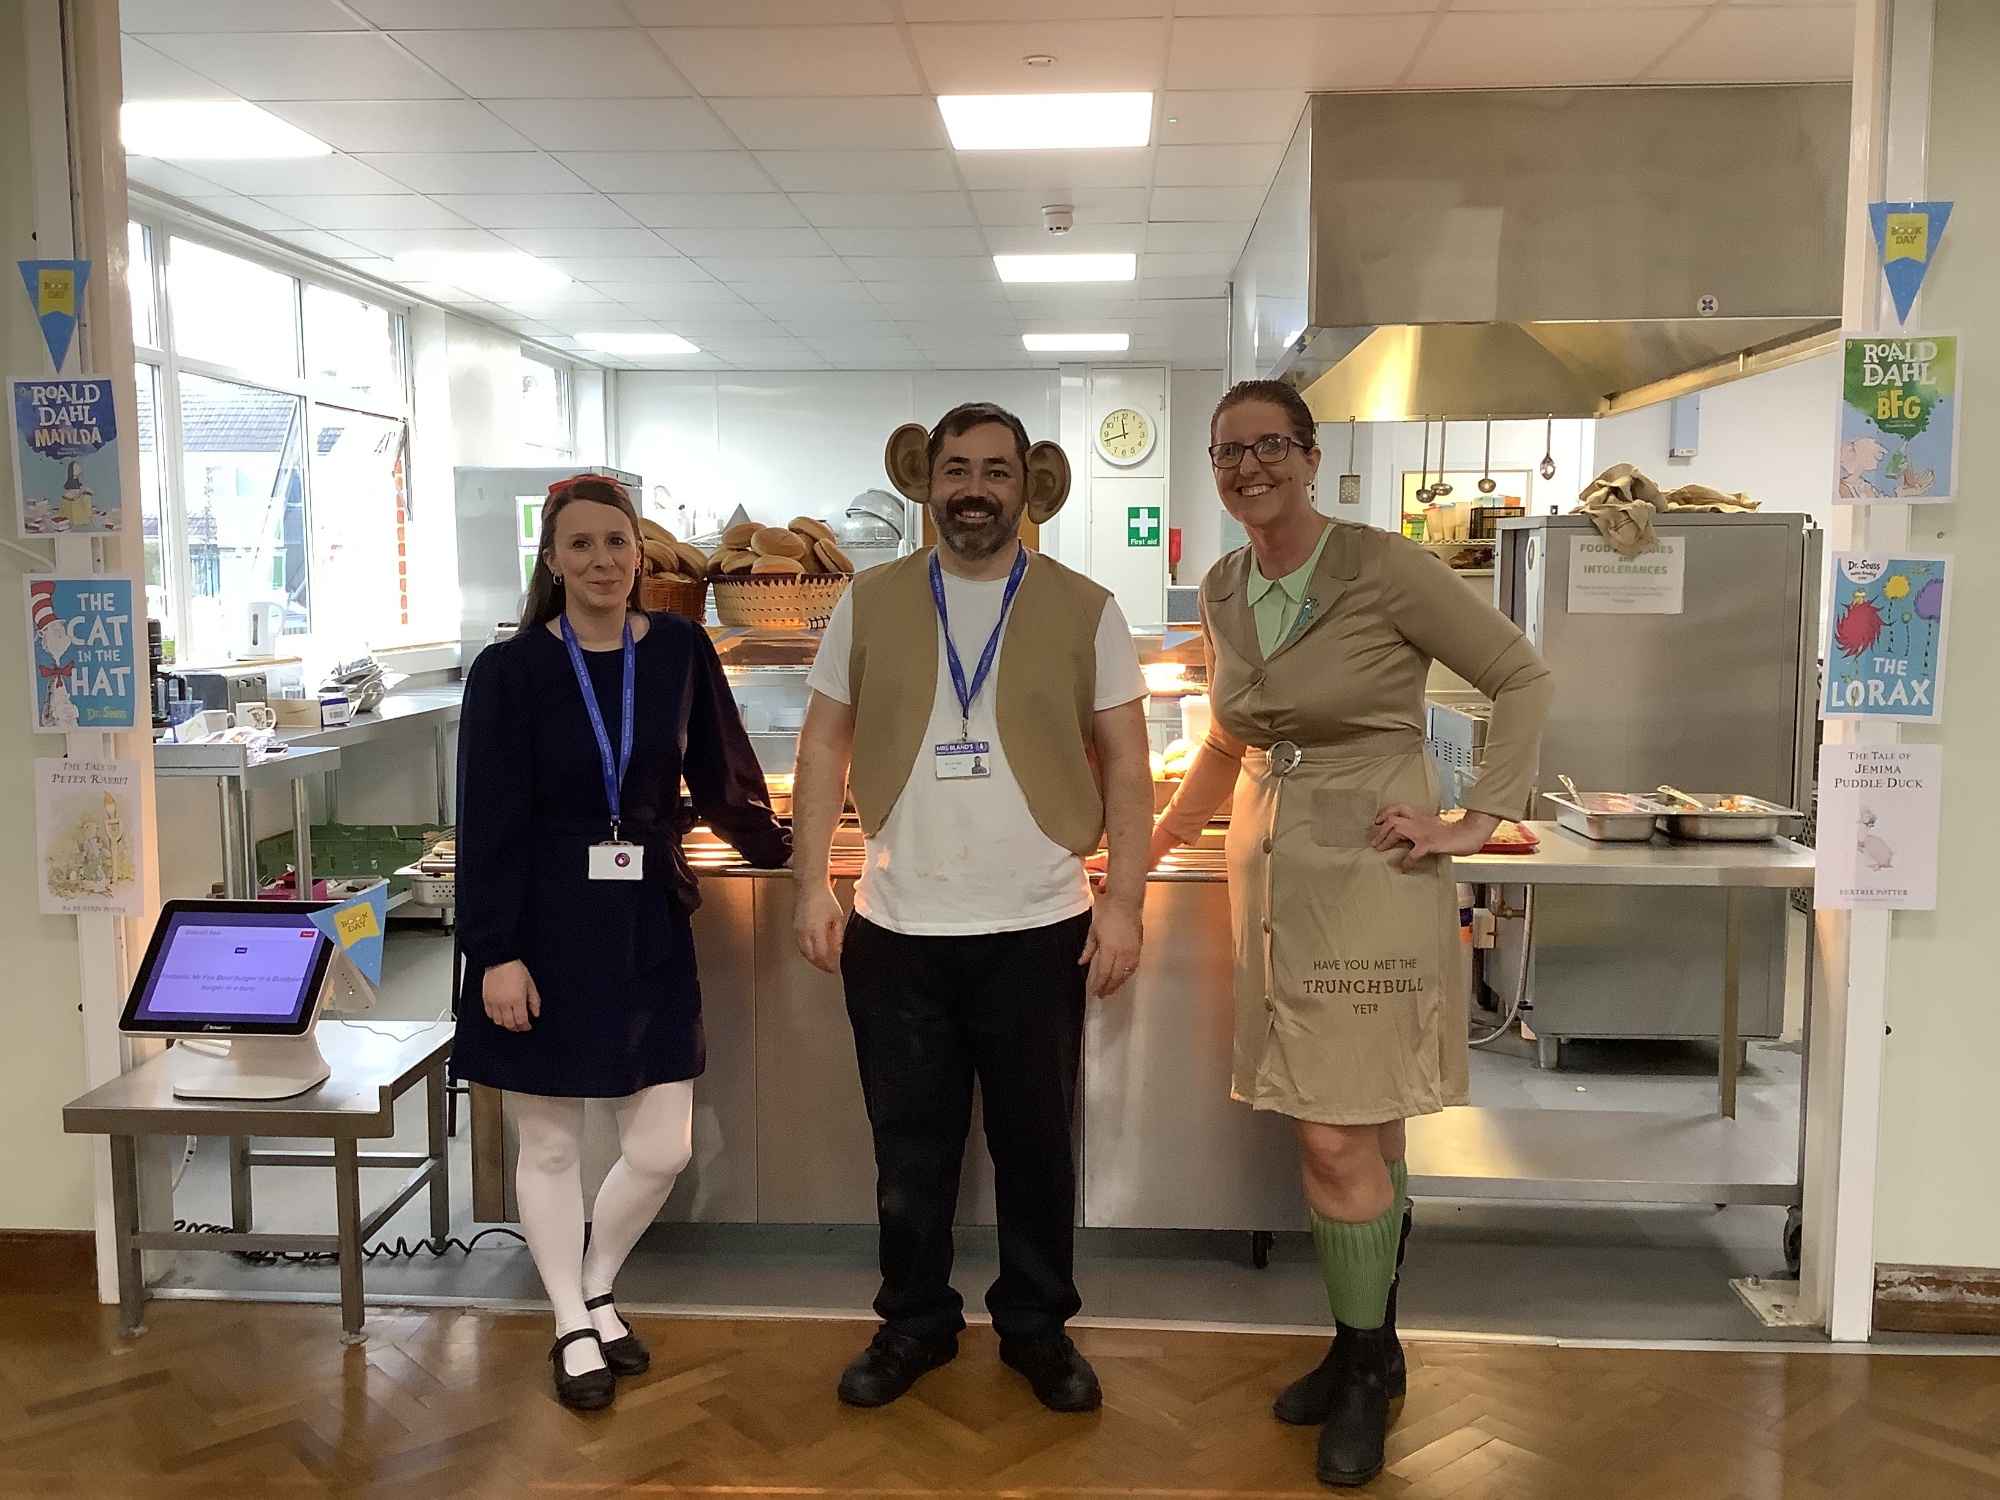 Catering Team dressed as various characters to celebrate World Book Day 24